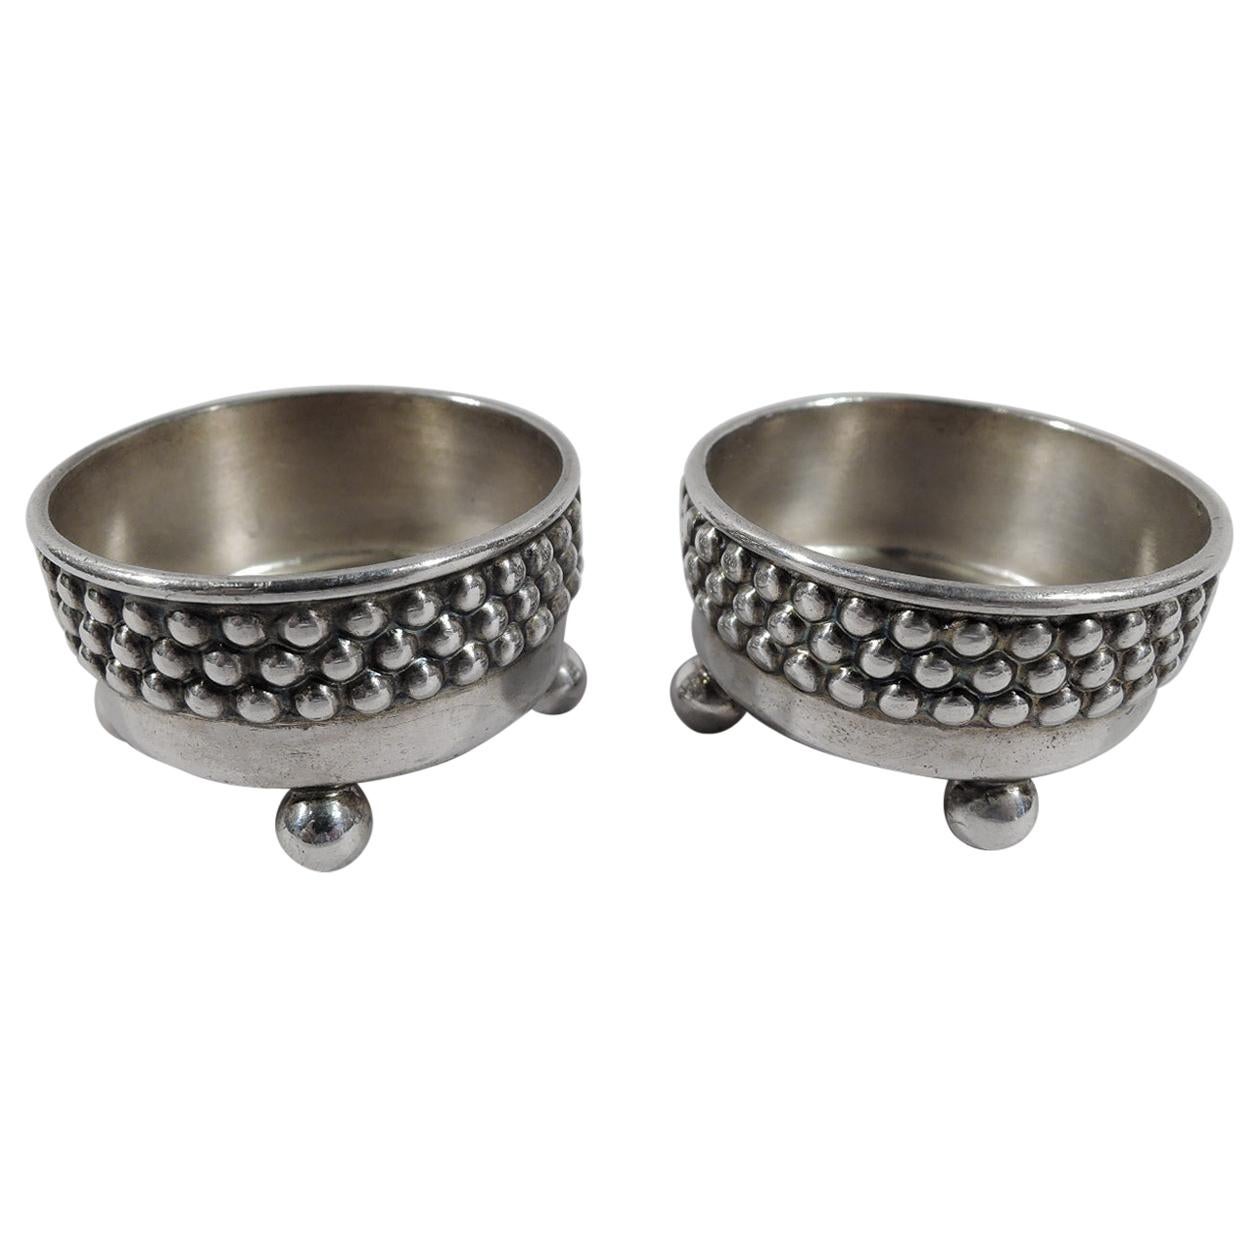 Pair of Tiffany Victorian Modern Sterling Silver Open Salts